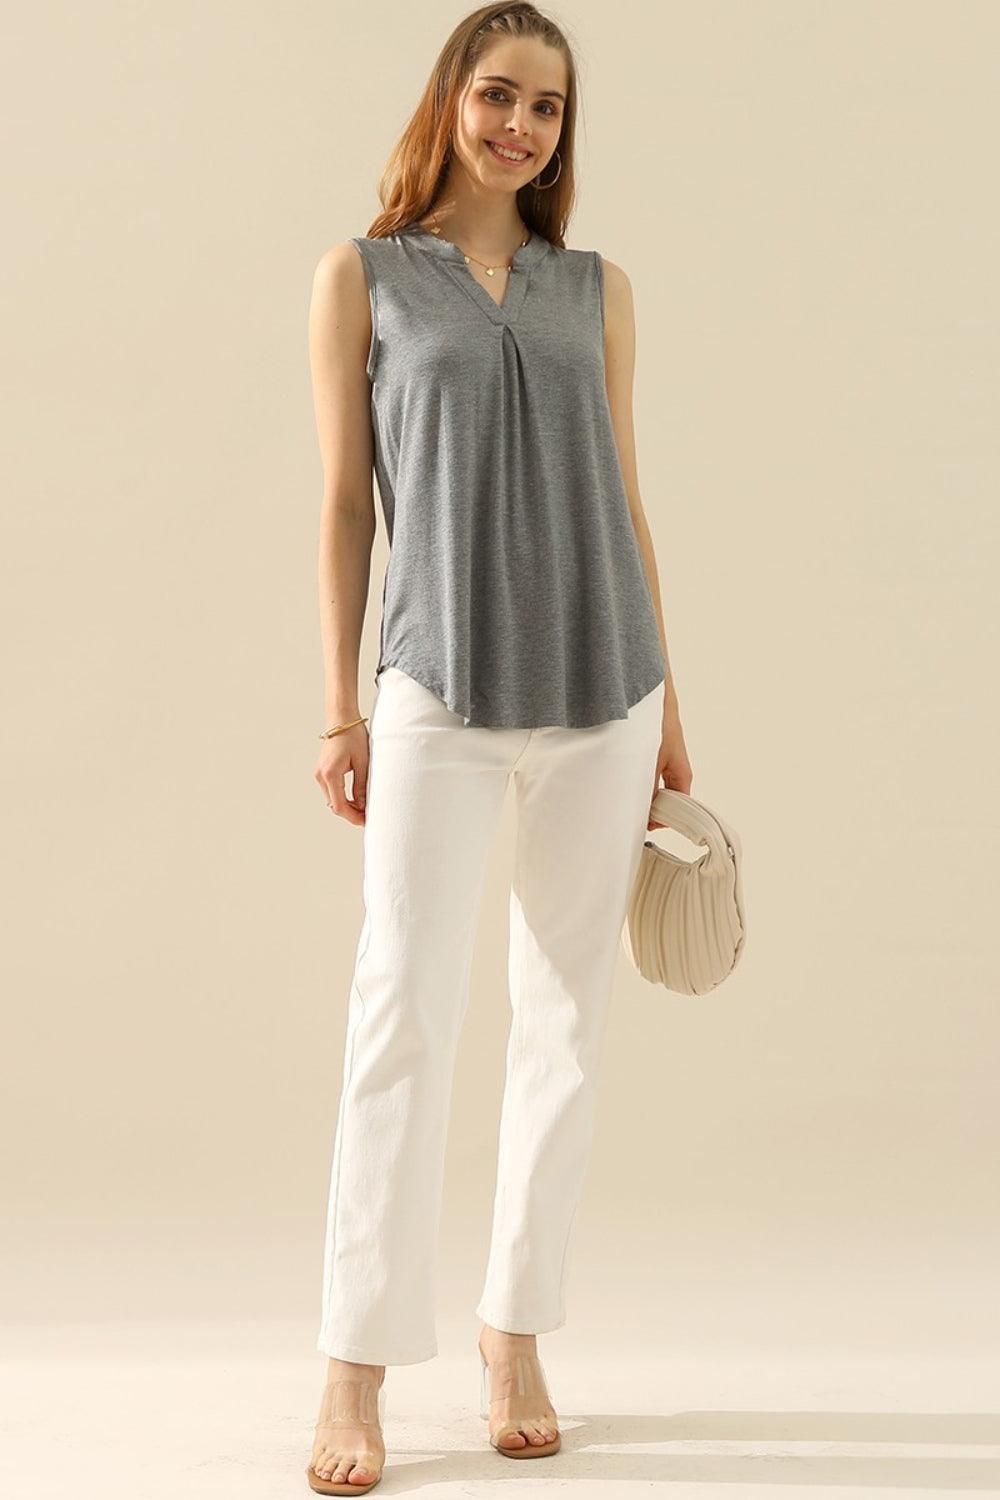 Ninexis Full Size Notched Sleeveless Top - AMIClubwear